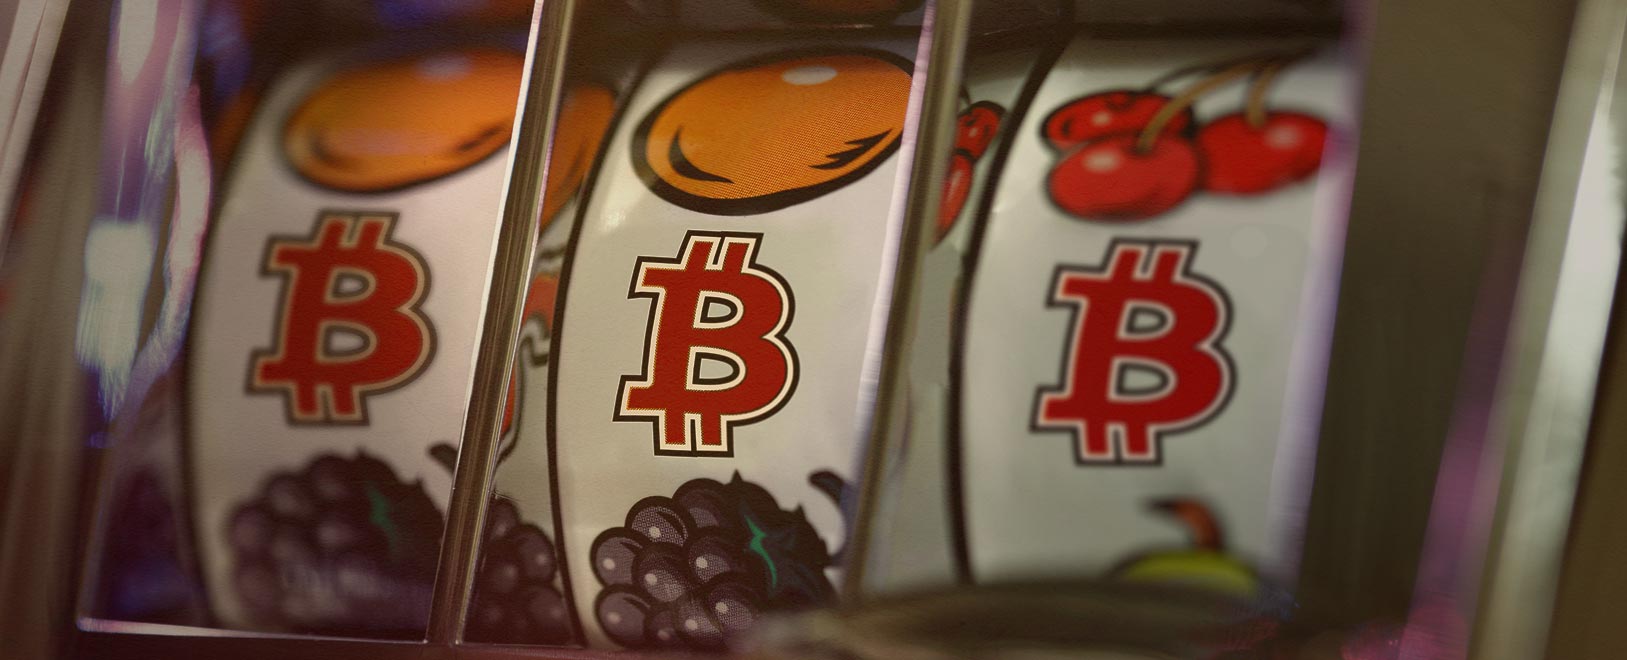 Use Bitcoin for New Slots at Ignition